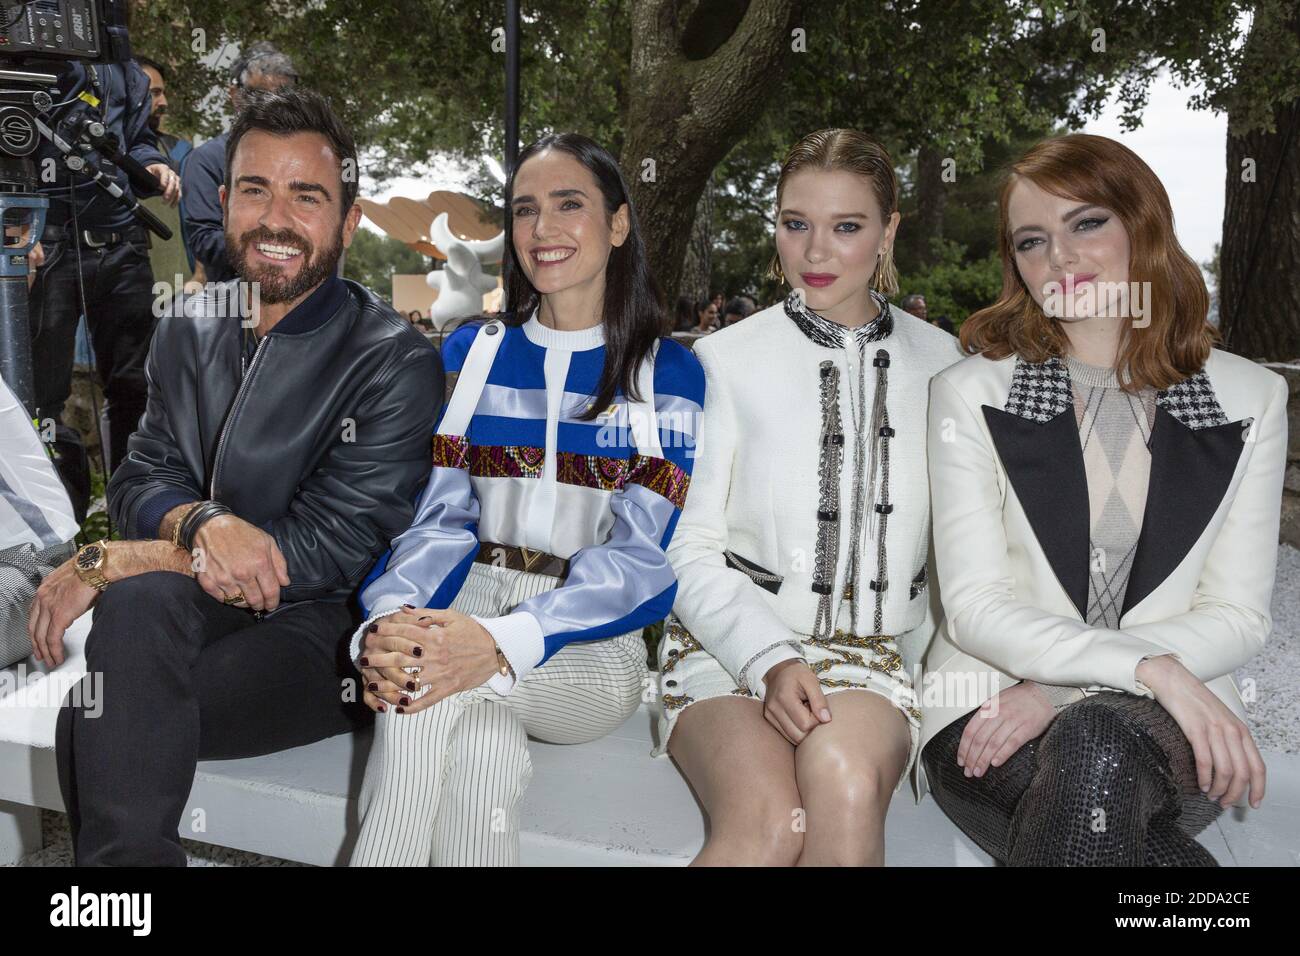 Bryan Boy attends the Louis Vuitton Cruise Collection fashion show, held at  the Fondation Maeght in Saint-Paul-de-Vence, south of France, on May 28,  2018. Photo by Marco Piovanotto/ABACAPRESS.COM Stock Photo - Alamy